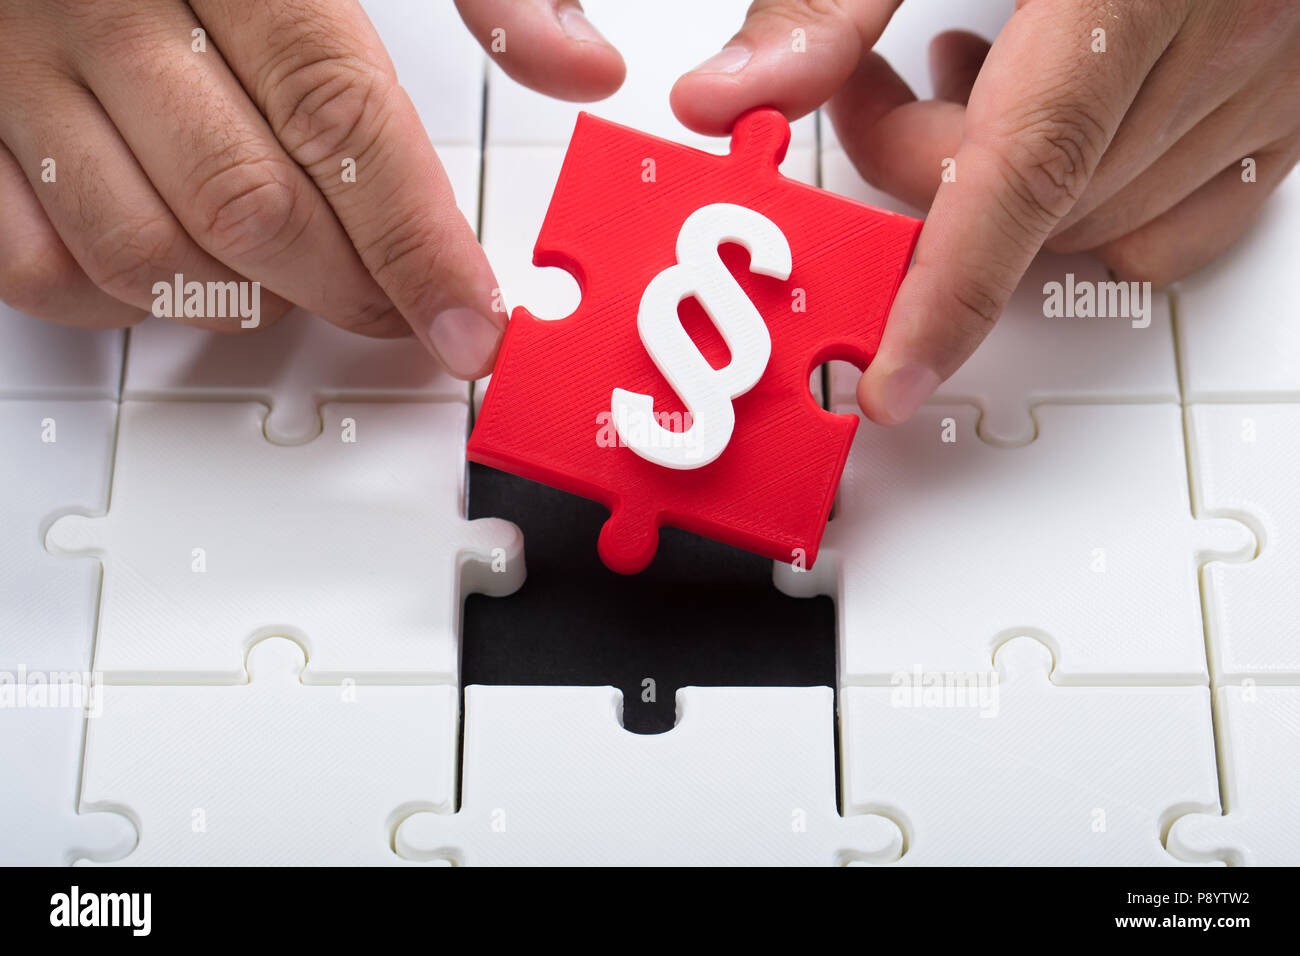 A person connecting last red piece with paragraph symbol into jigsaw puzzles Stock Photo